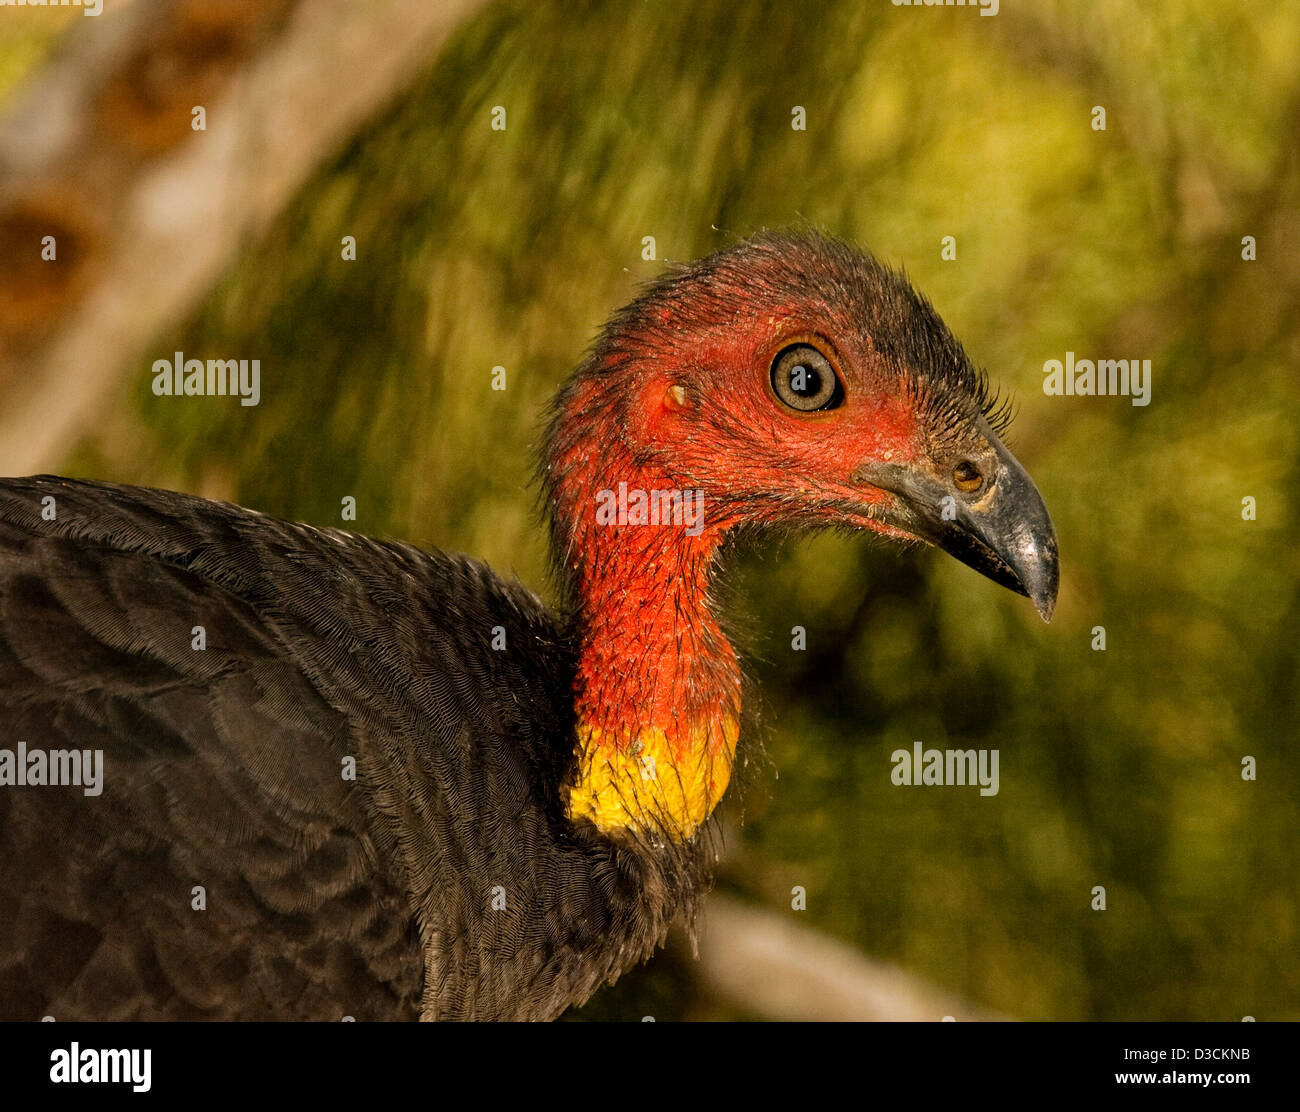 Close up of male Australian scrub / brush turkey Alectura lathami in the wild - showing red head, neck, and face and bright eye. Stock Photo